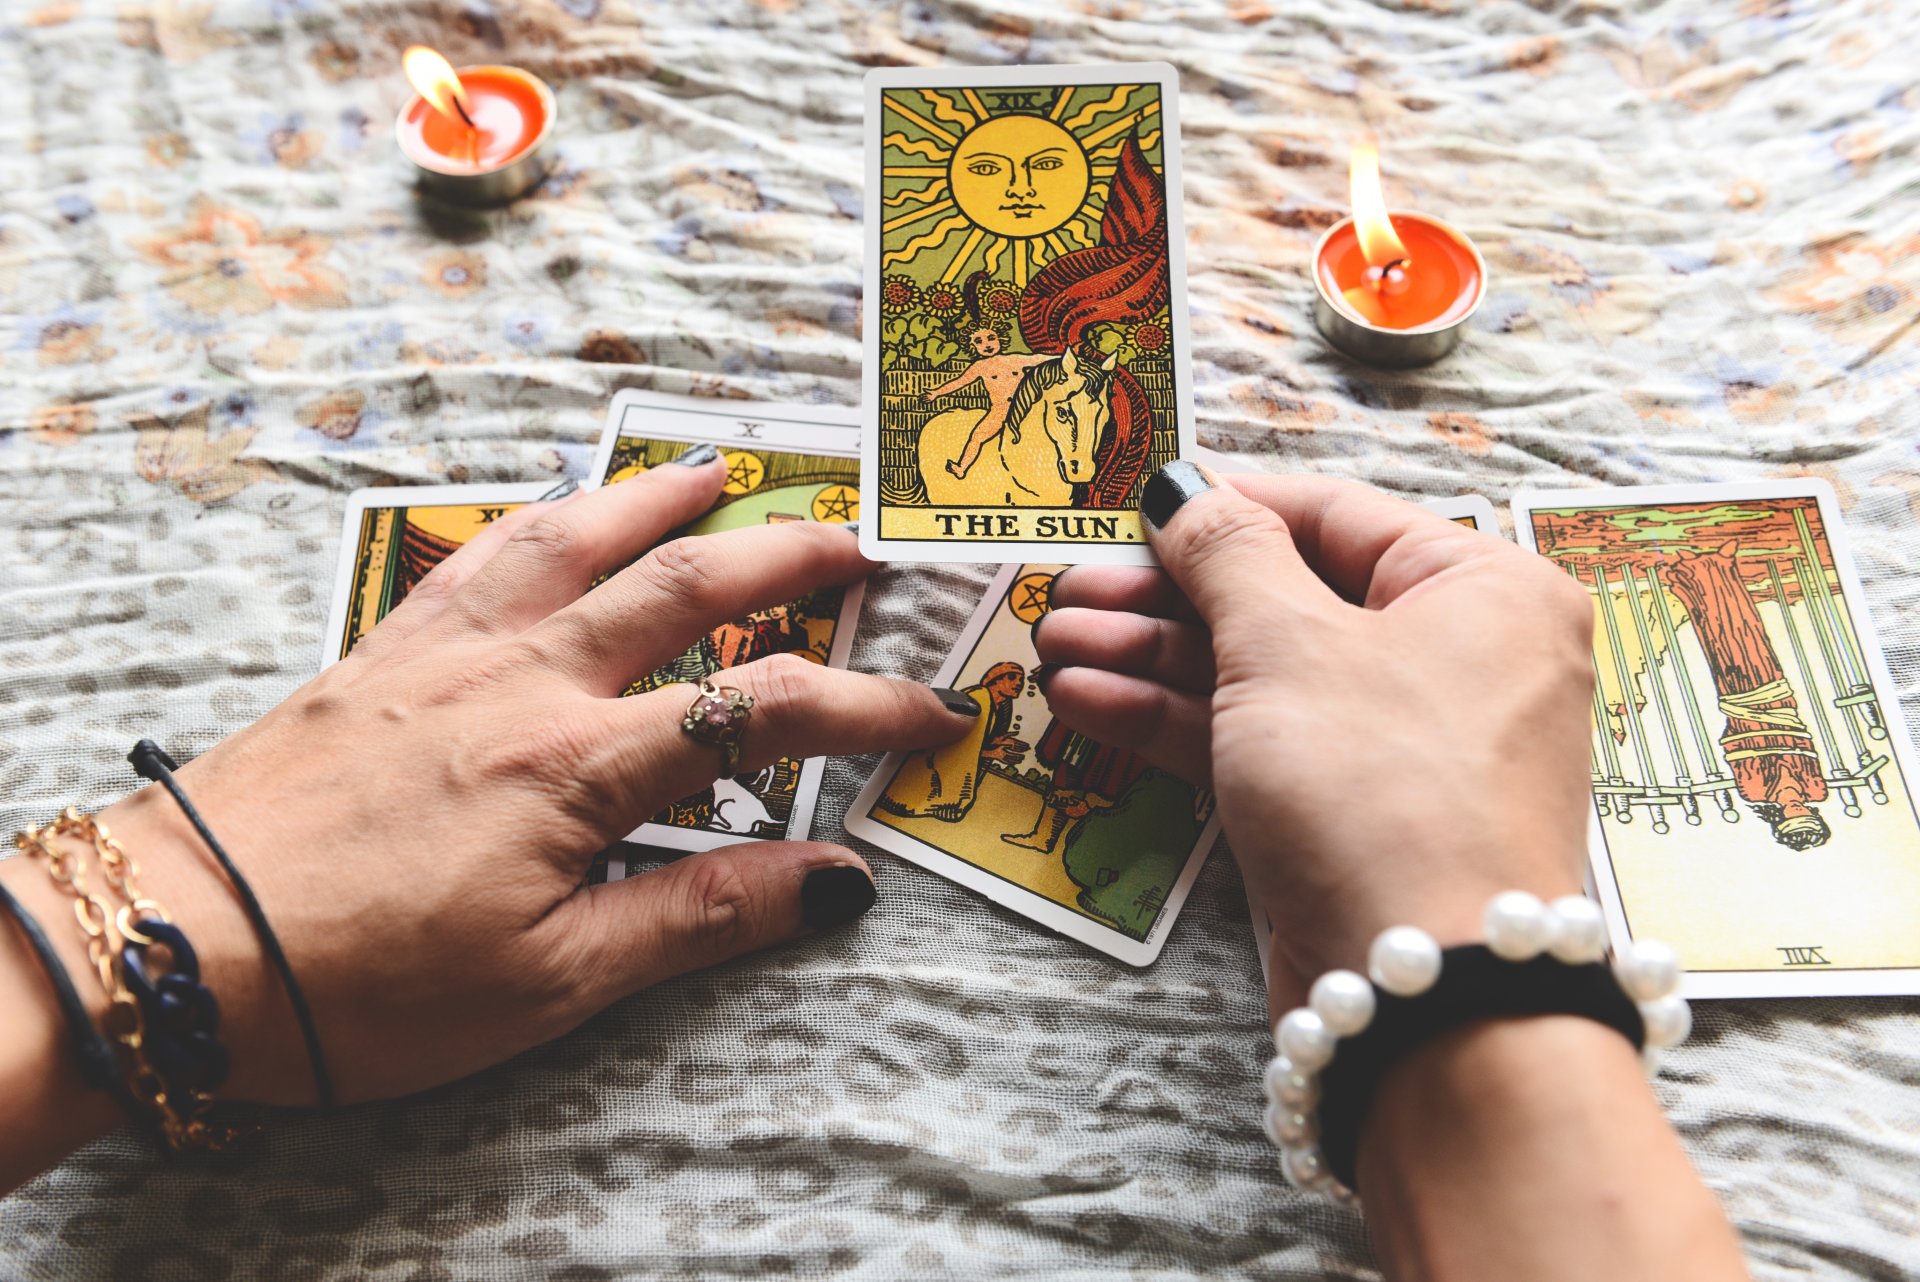 Show fortune tellers of hands holding tarot cards and tarot read